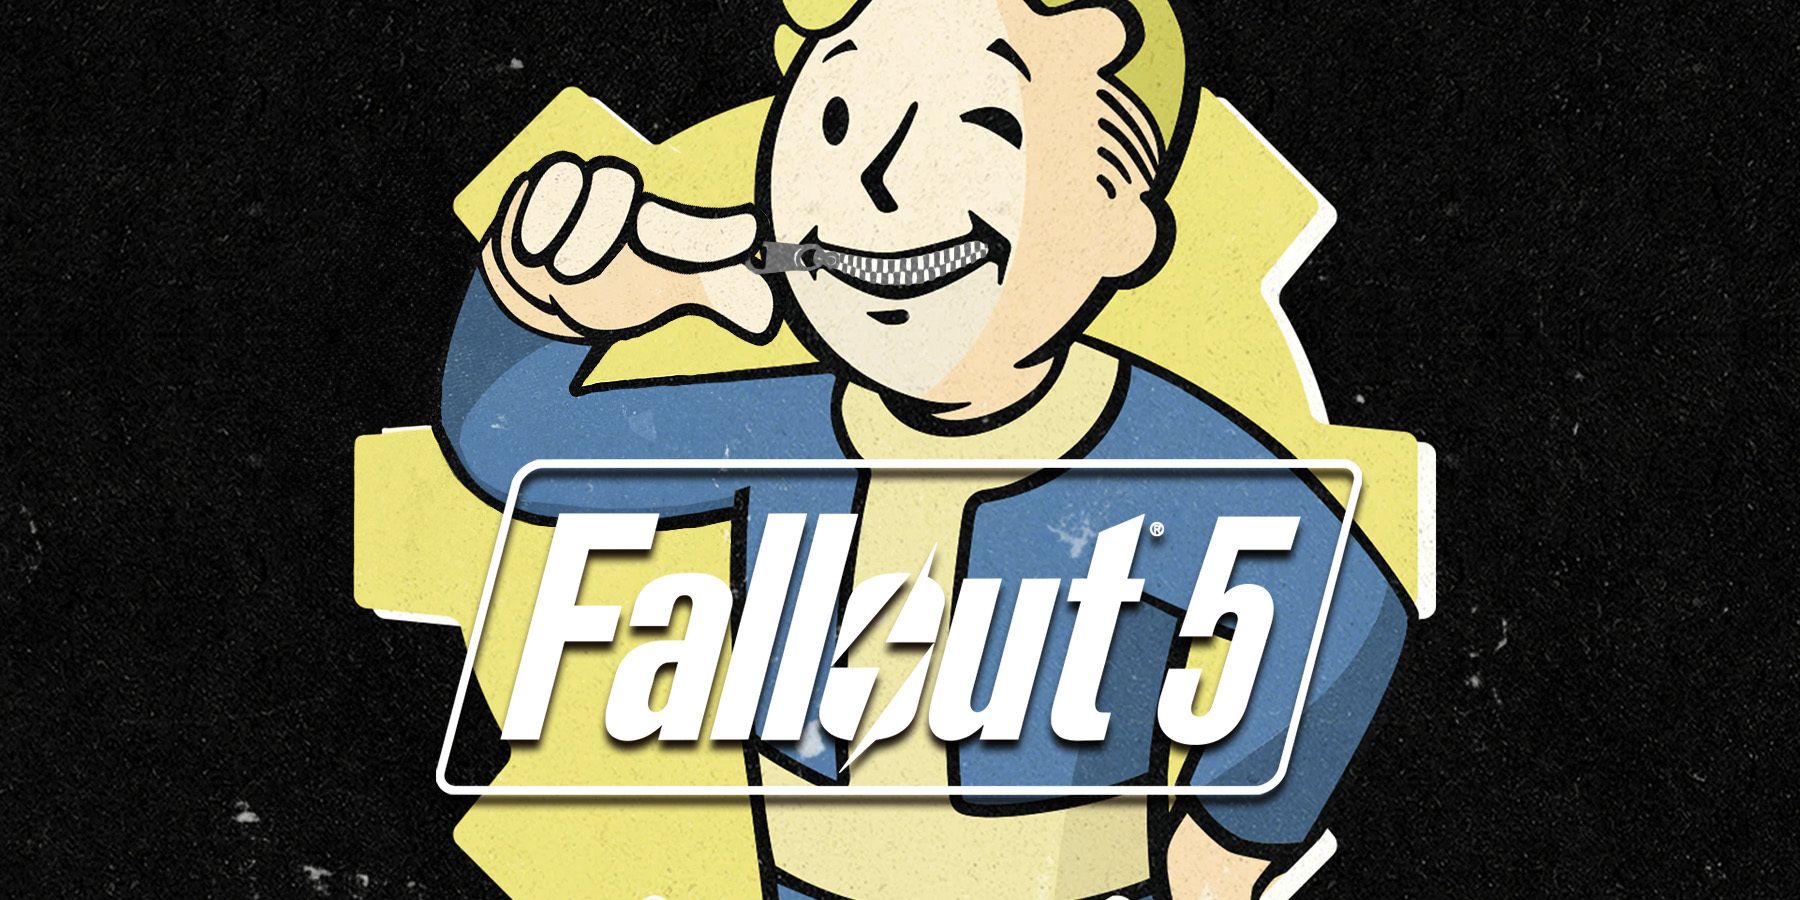 Vault Boy zipping his mouth with a Fallout 5 logo